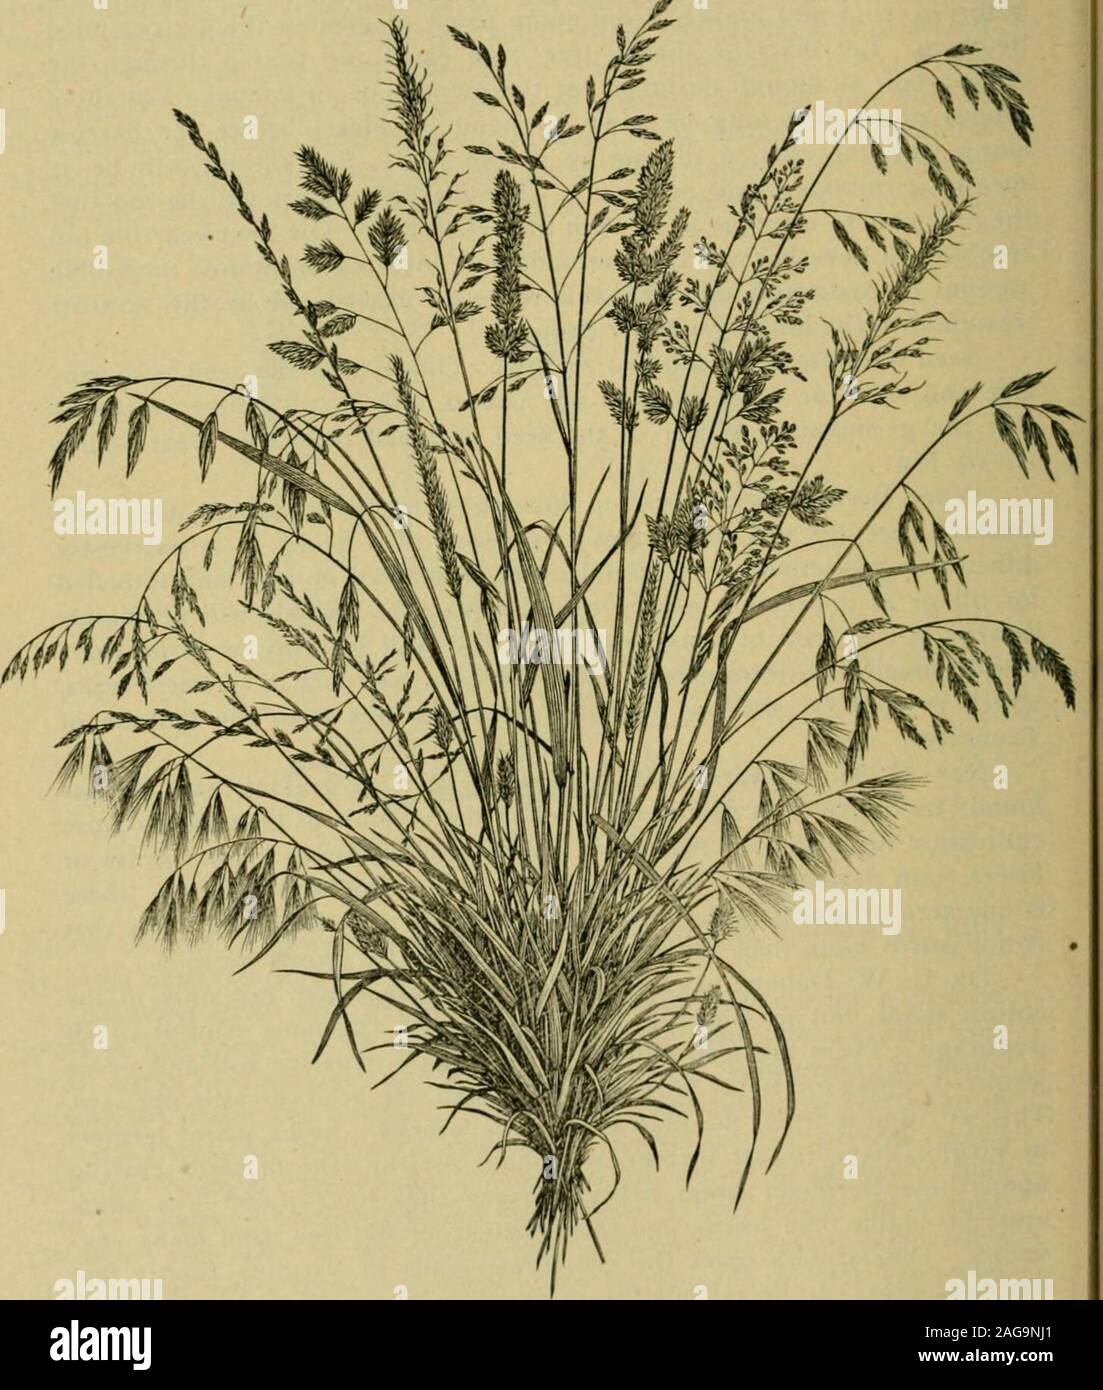 . Grasses and forage plants, by J.B. Killebrew. ne head of cattle per acre.This will almost equal the blue grass in Kentucky. Some wheat farmersin Virginia have almost surrendered tillage for the sake of cattle rearingupon these Bermuda grass fields, because they have found live stockmore profitable than wheat, and their present pursuit free from many vex-ations. The farmers upon the red-wheat lands of Virginia report thatBermuda prass can be entirely dispossessed by turning it under and keep-ing it constantly under the plow for two or three years. In this case theyadvise, after taking ofT the Stock Photo